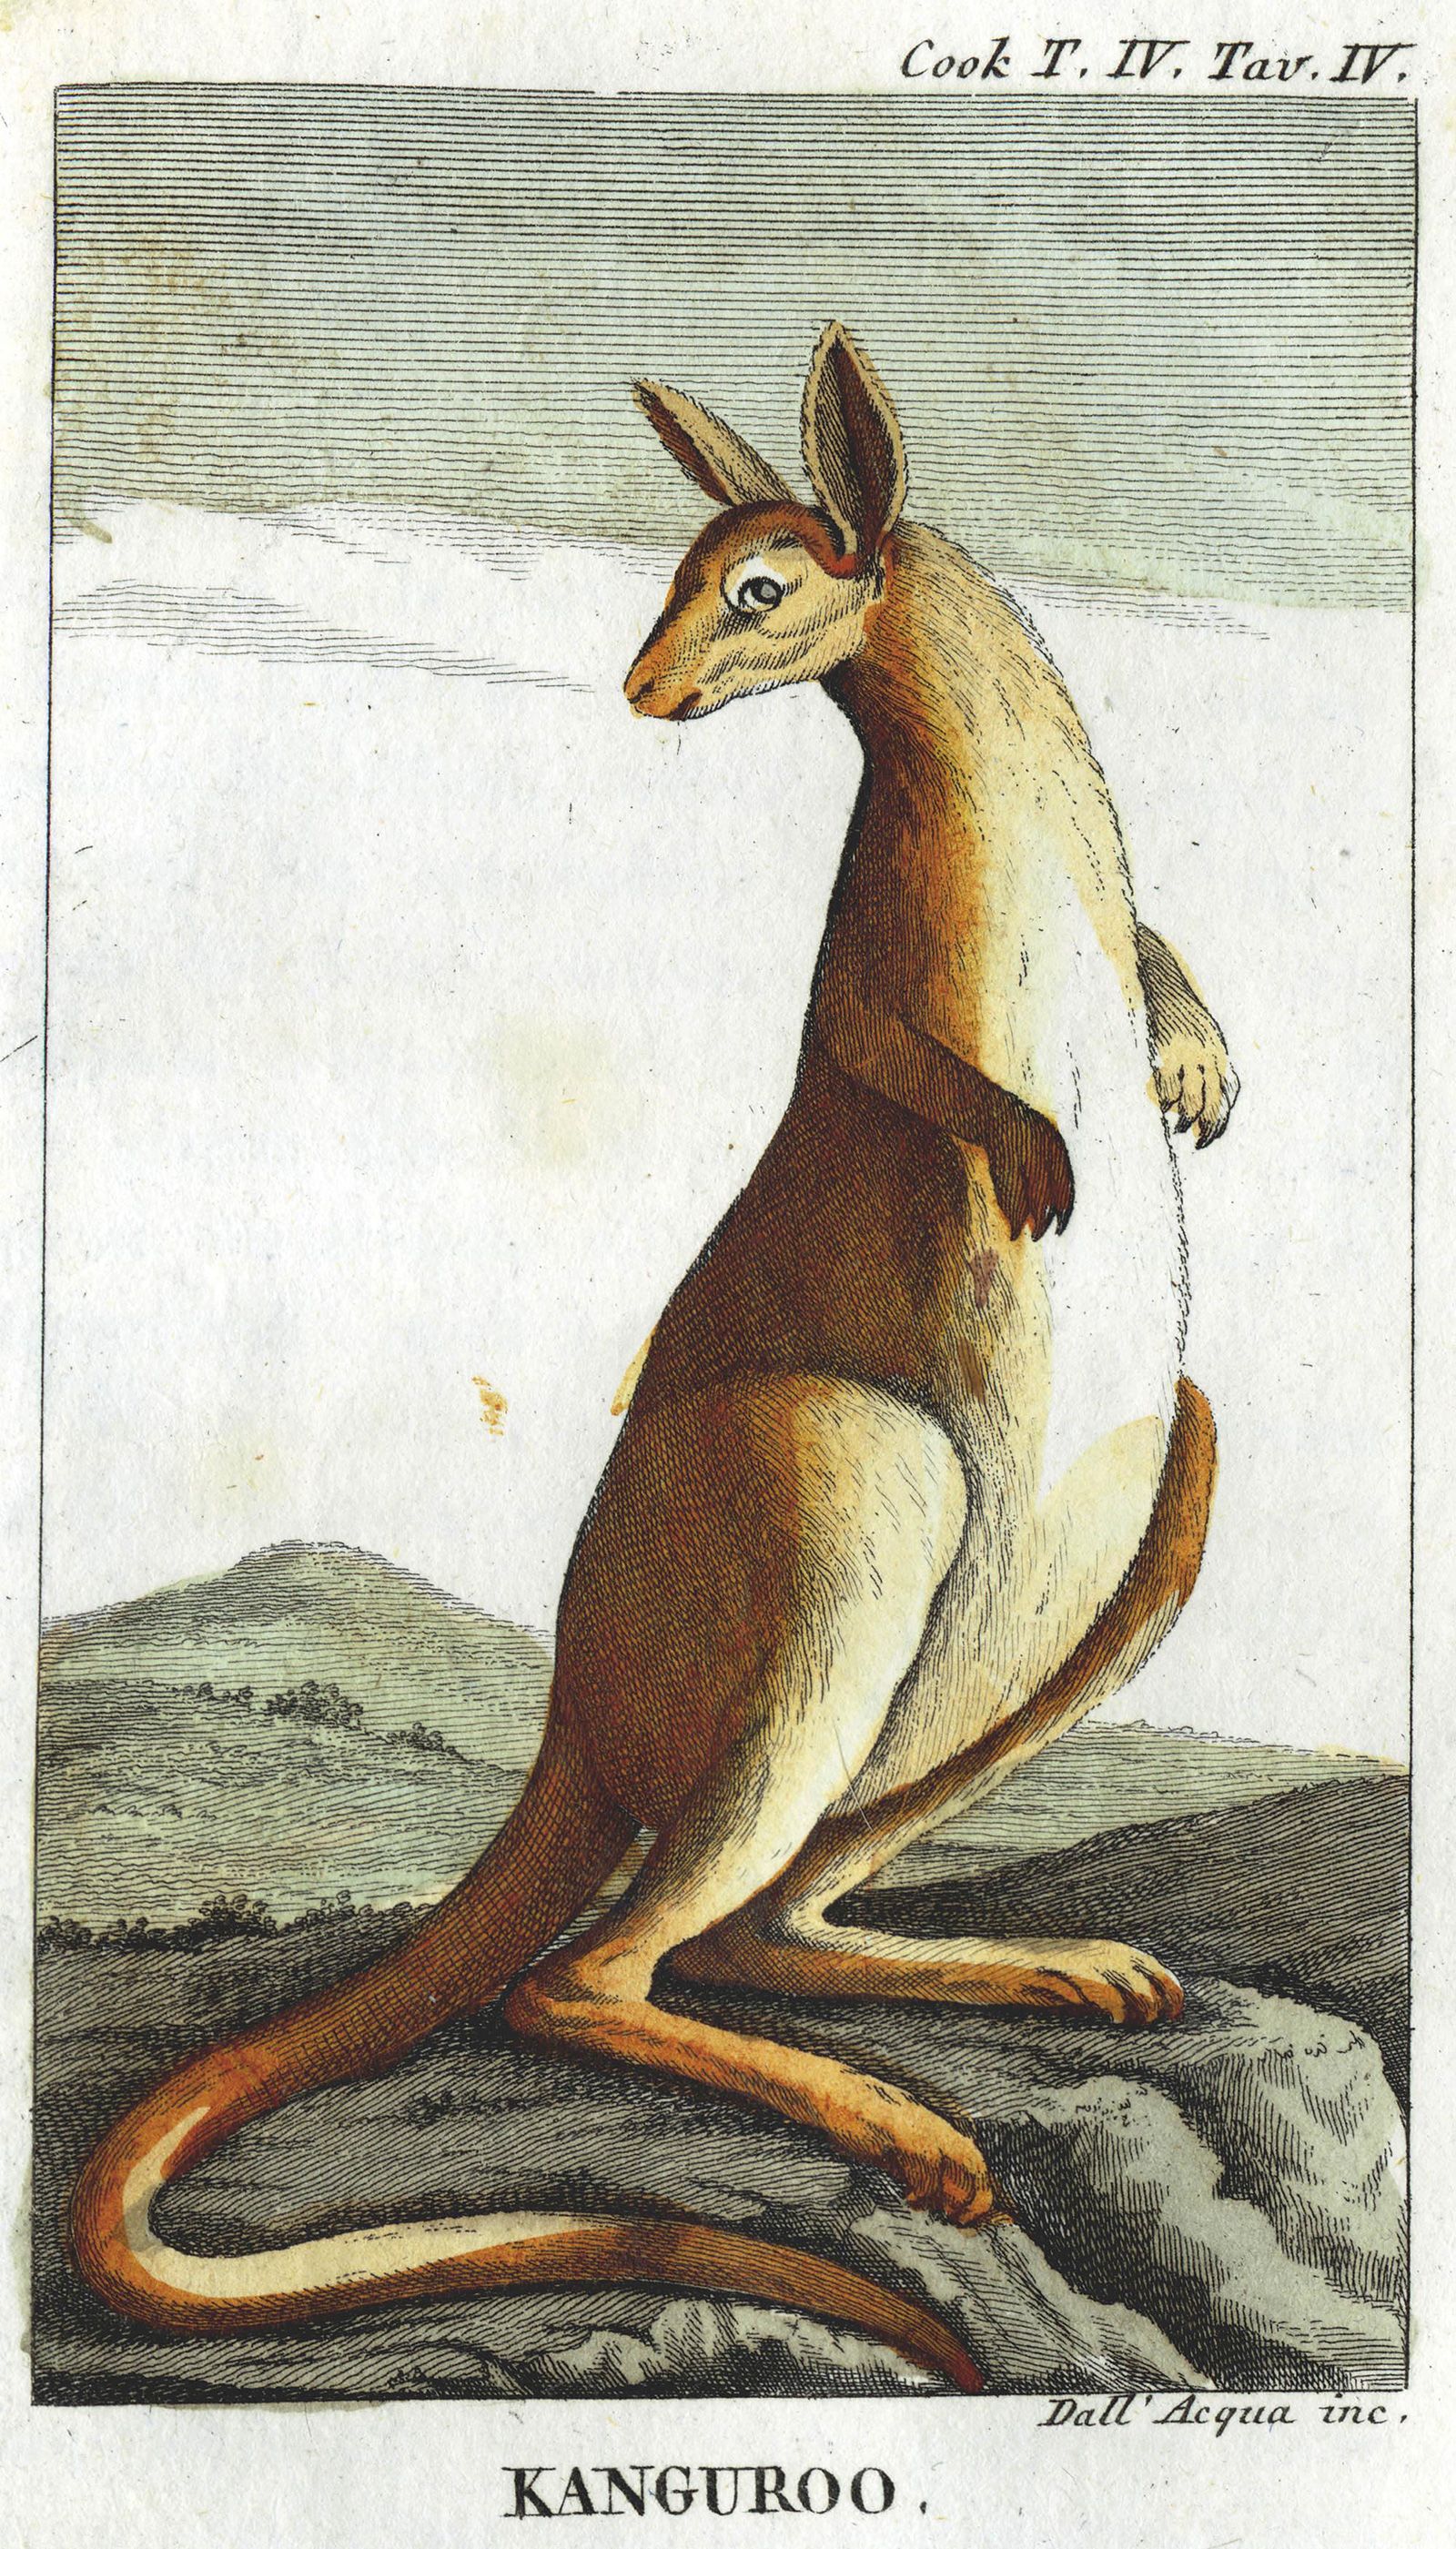 A circa-1816 color engraving of a "kanguroo," based on a sketch by Sydney Parkinson.